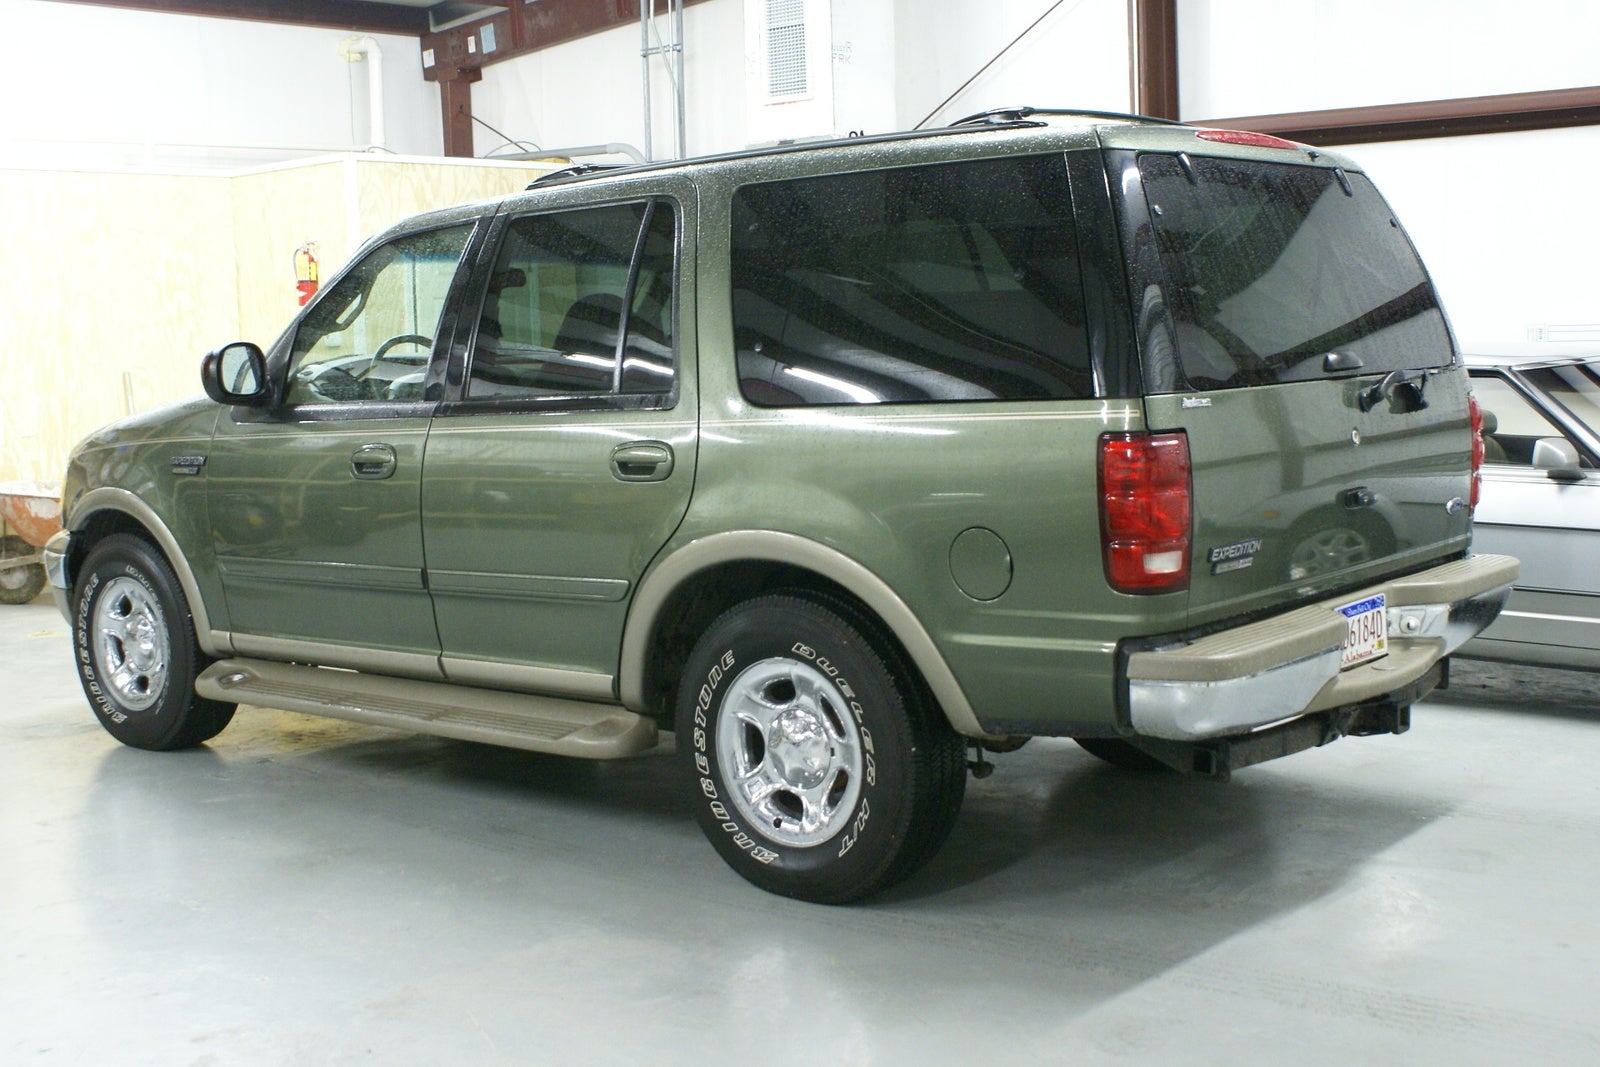 2004 Ford expedition stock rims #10